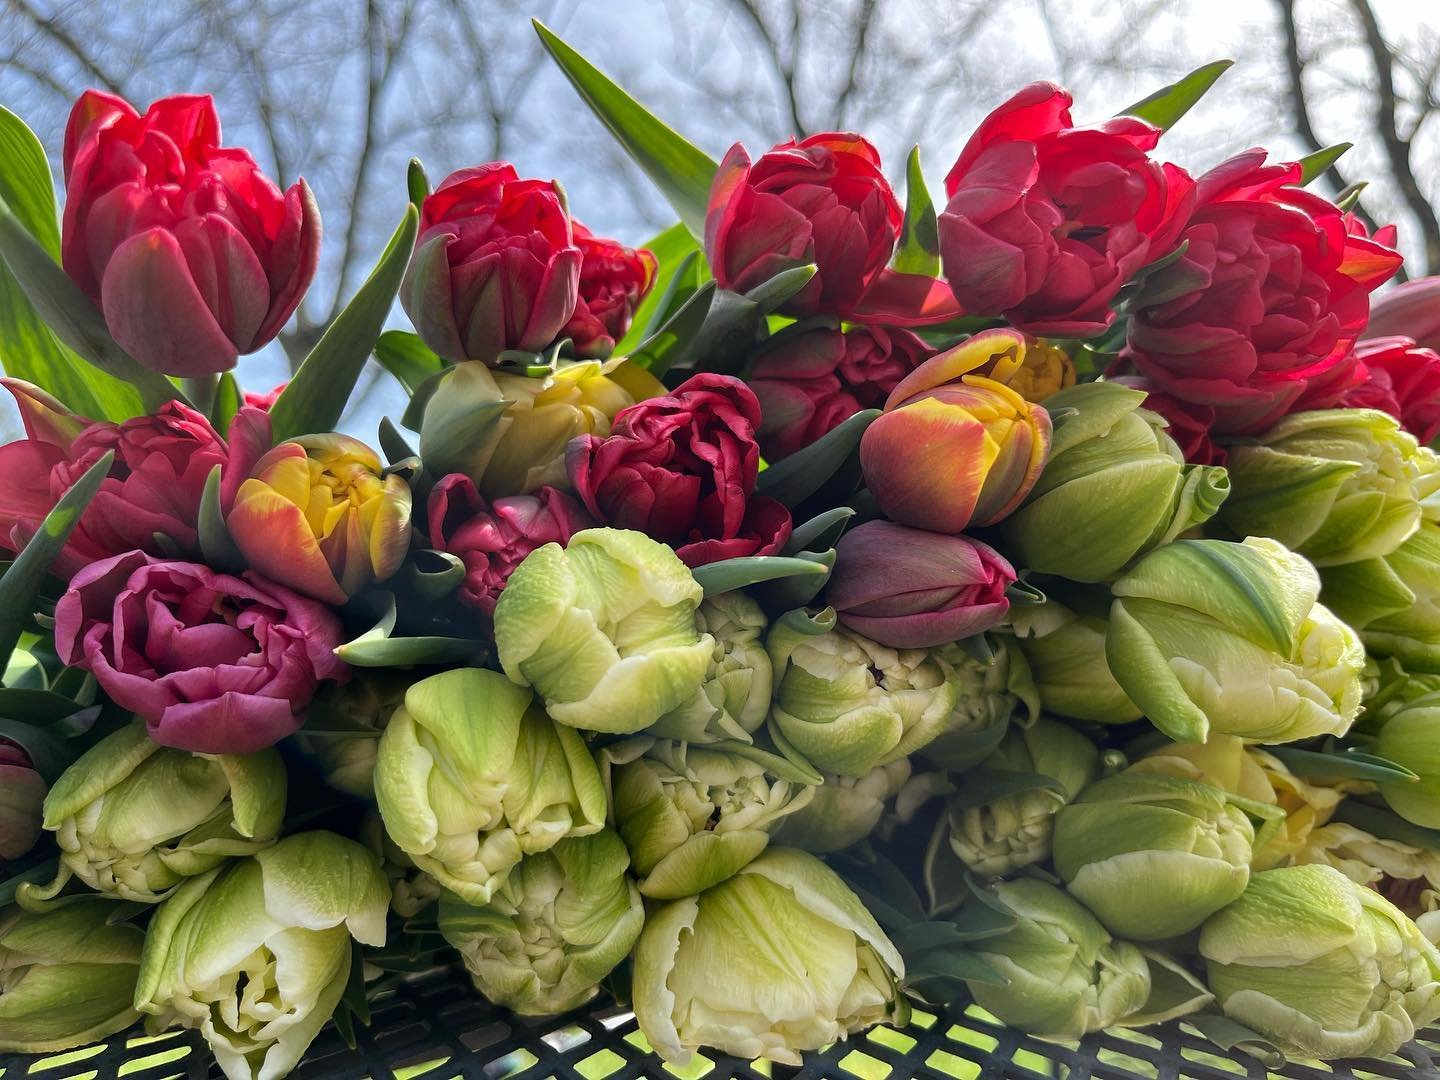 The spring flowers have officially started blooming and opening day for our Flower Cart will be this Saturday, April 20th at 9am! 🌷🌷🌷 The cart will be stocked with fresh bouquets for $15 each, located at the end of our driveway at 3064 Woodland Ro